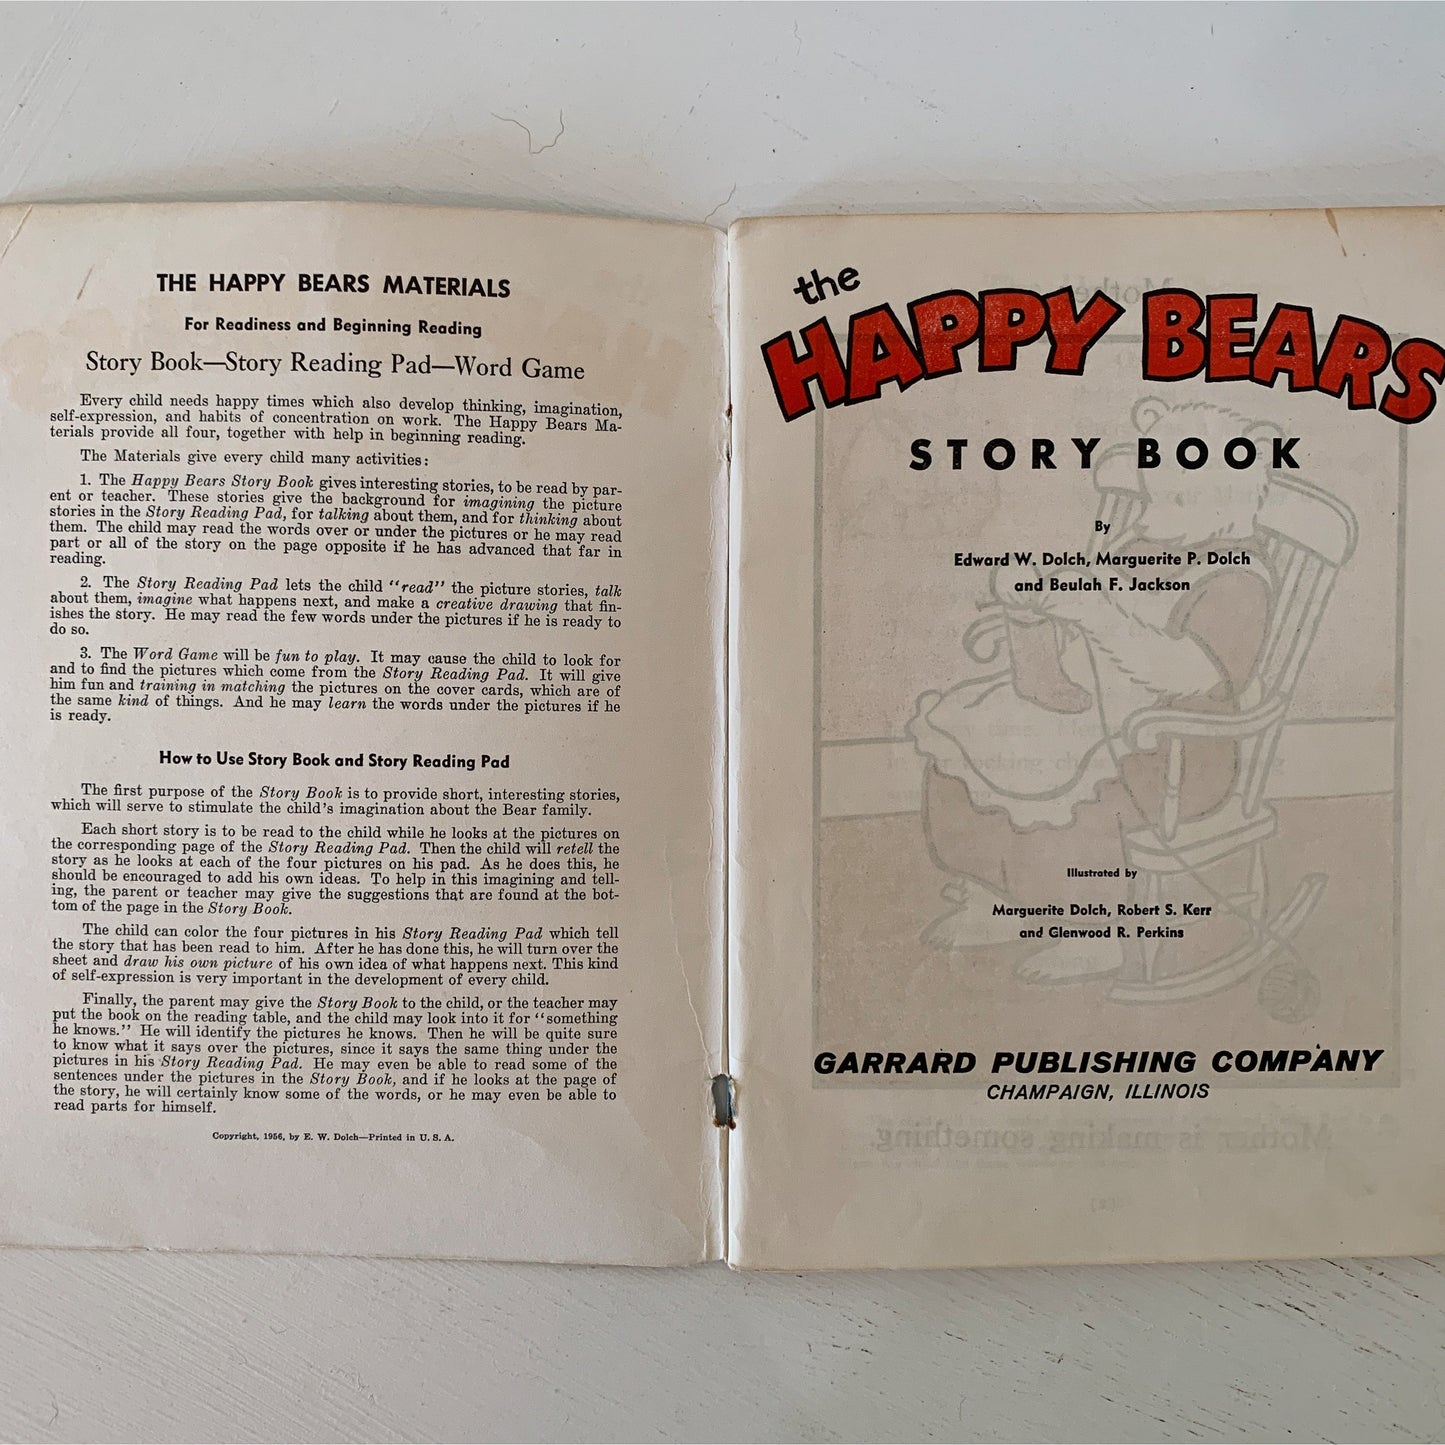 The Happy Bears, A Dolch Story Book, Paperback, 1956